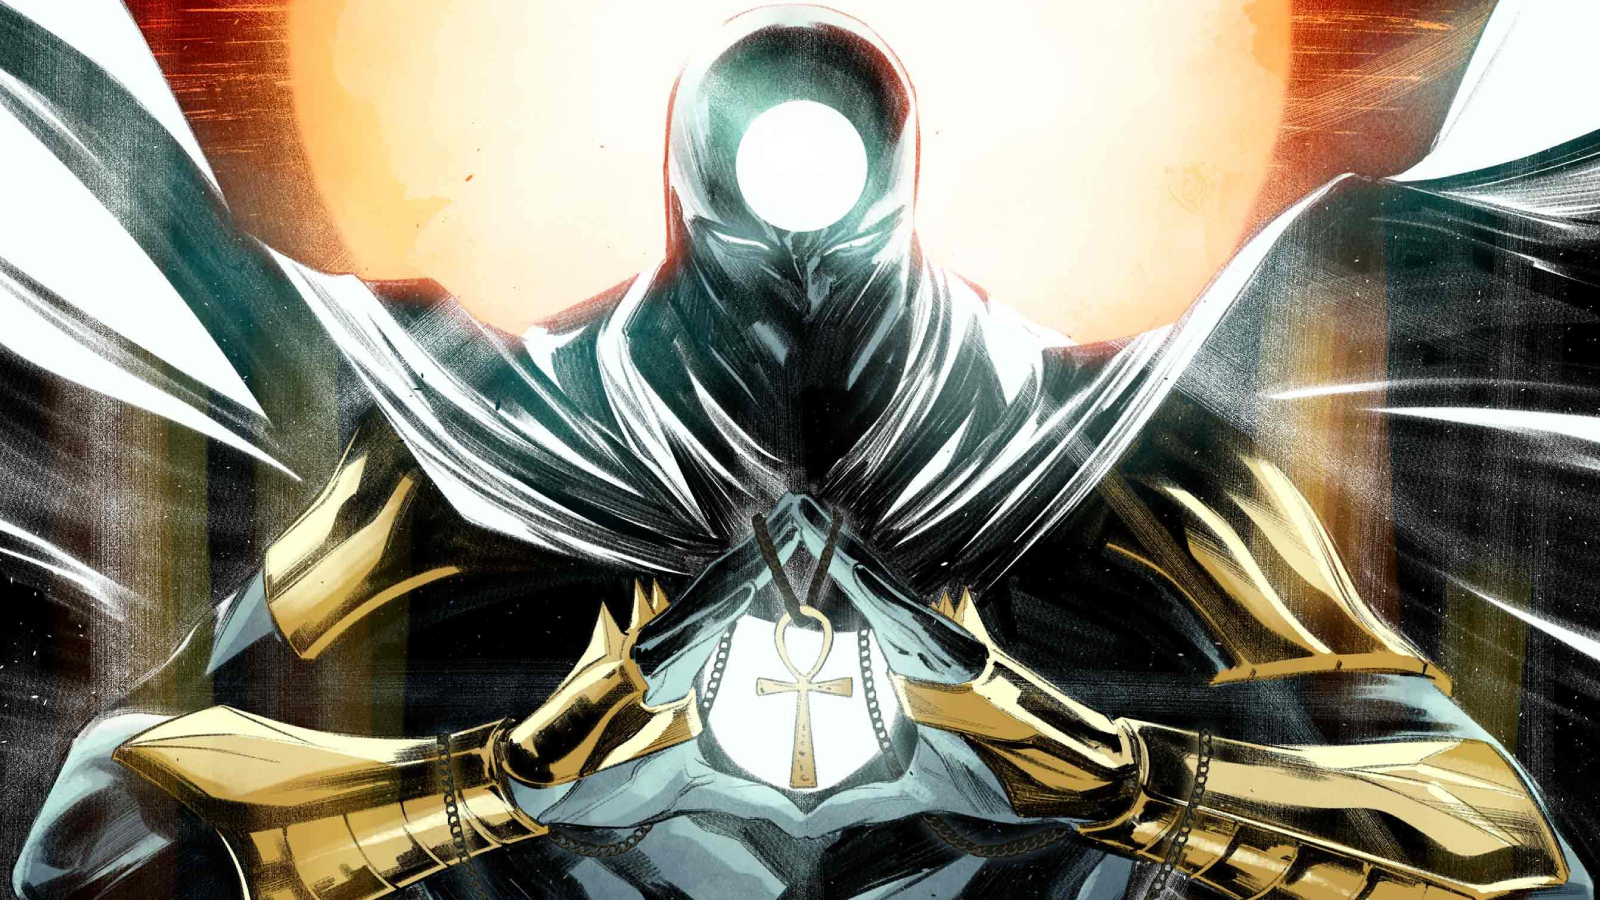 Vengeance Of The Moon Knight announced by Marvel in new trailer